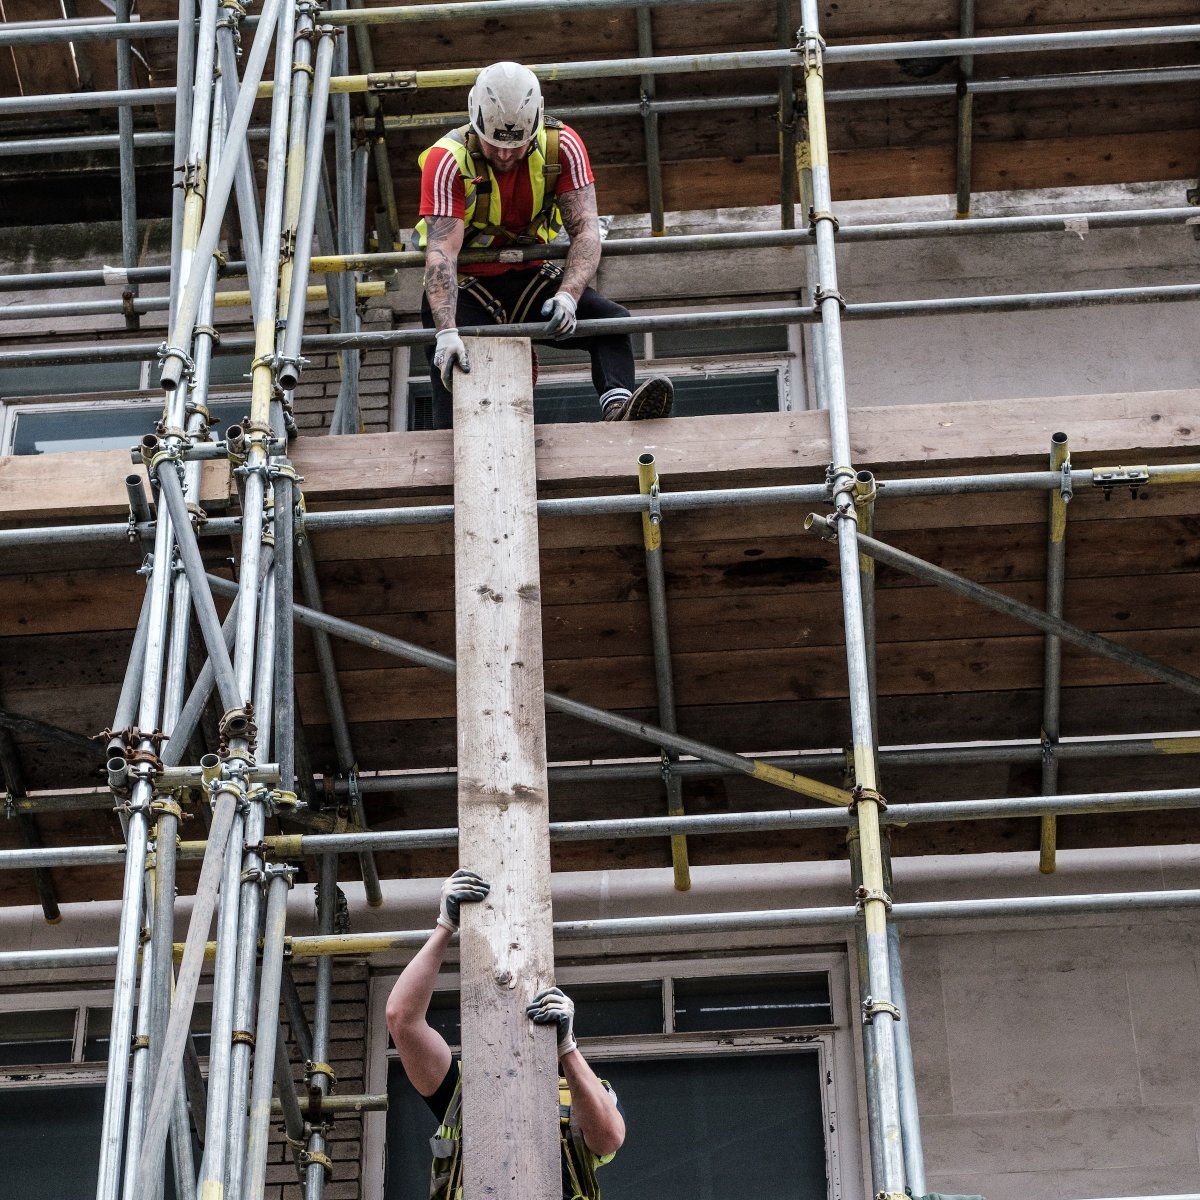 🌟 Caption Competition 🌟

What do you think these scaffolders are saying to each other? 🤔

#Scaffolding #Construction #ConstructionUK #Caption #WestMidsHour